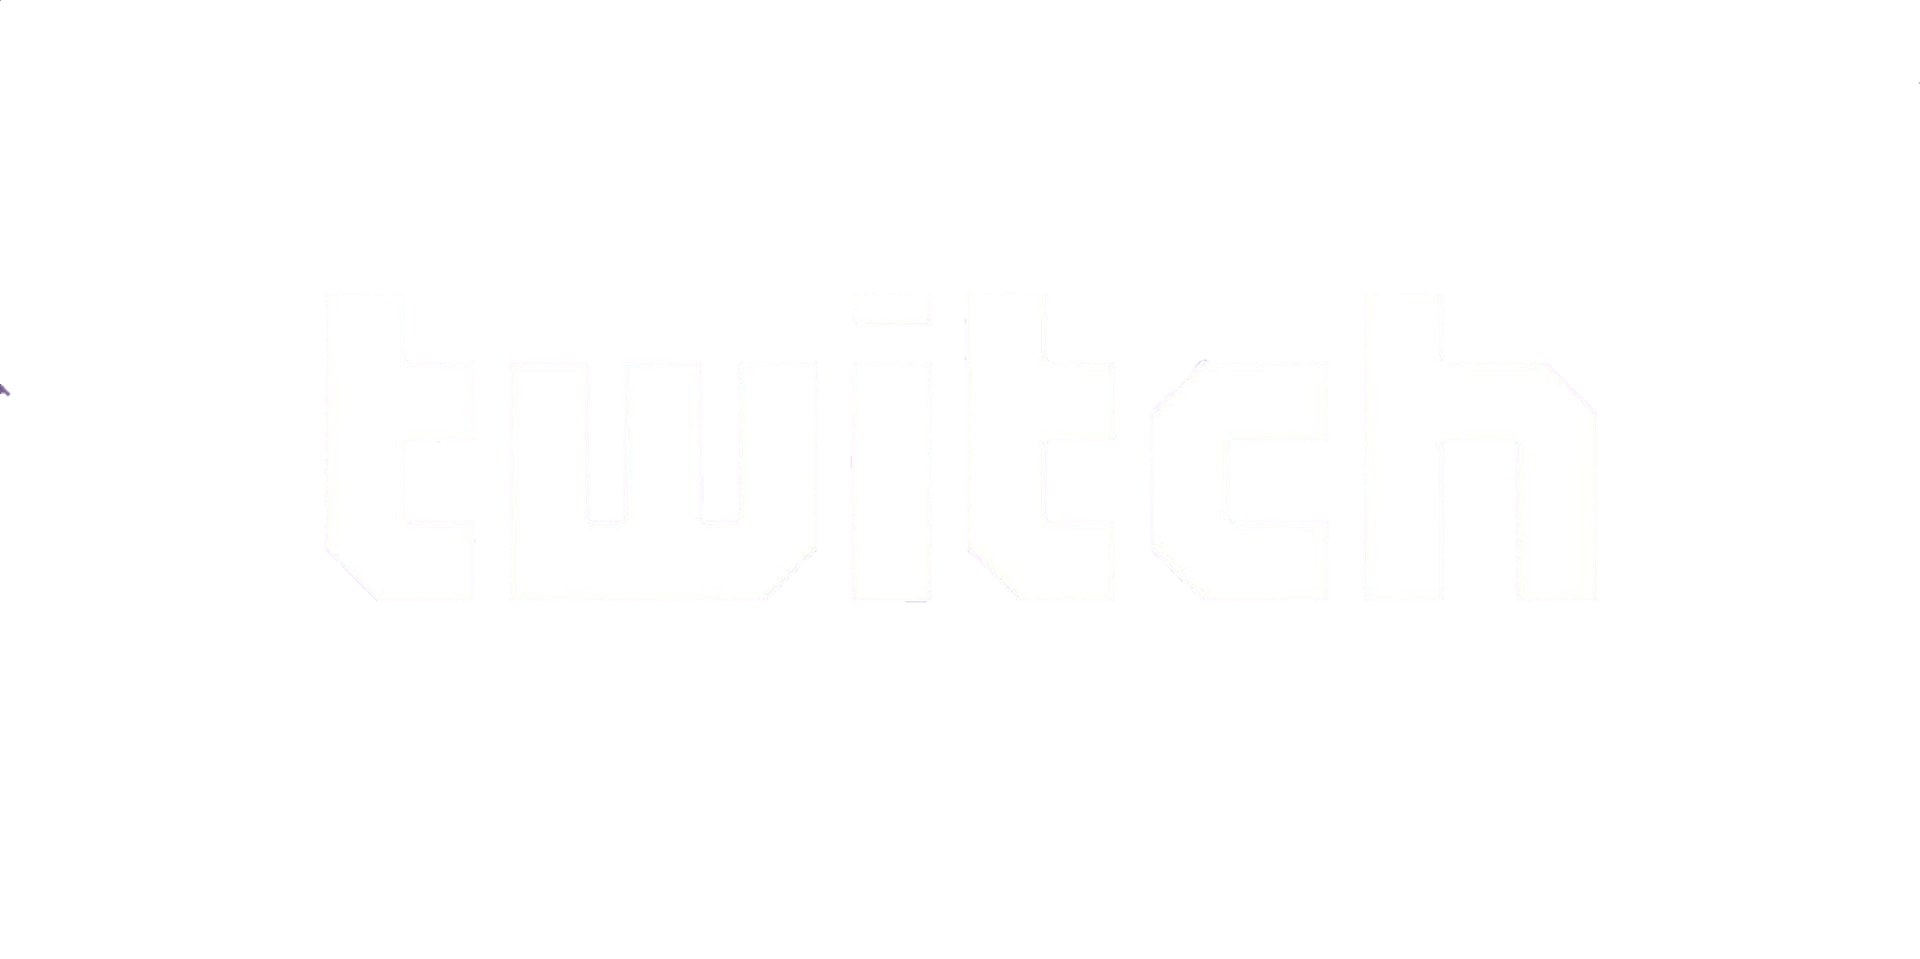 twitch-logo-png-from-pngfre-9